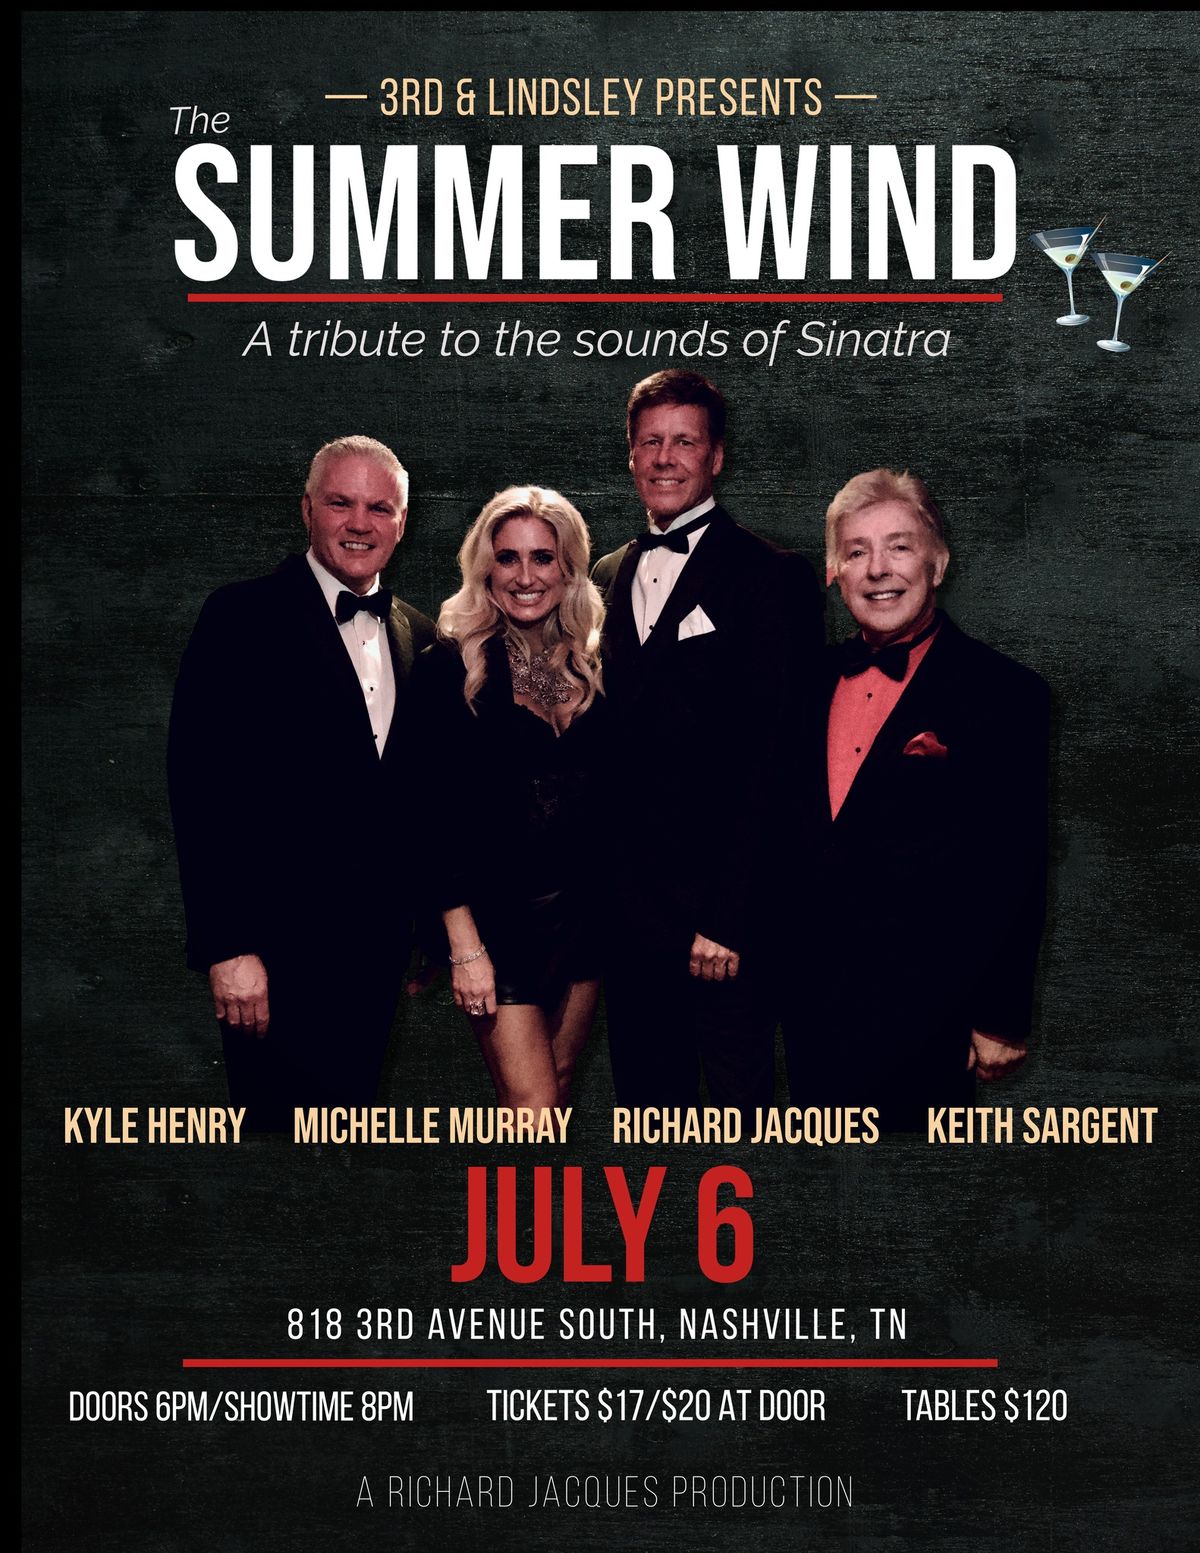 Summer Wind - A Tribute to The Sounds of Sinatra featuring Kyle Henry, Michelle Murray, Richard Jacques & Keith Sargent